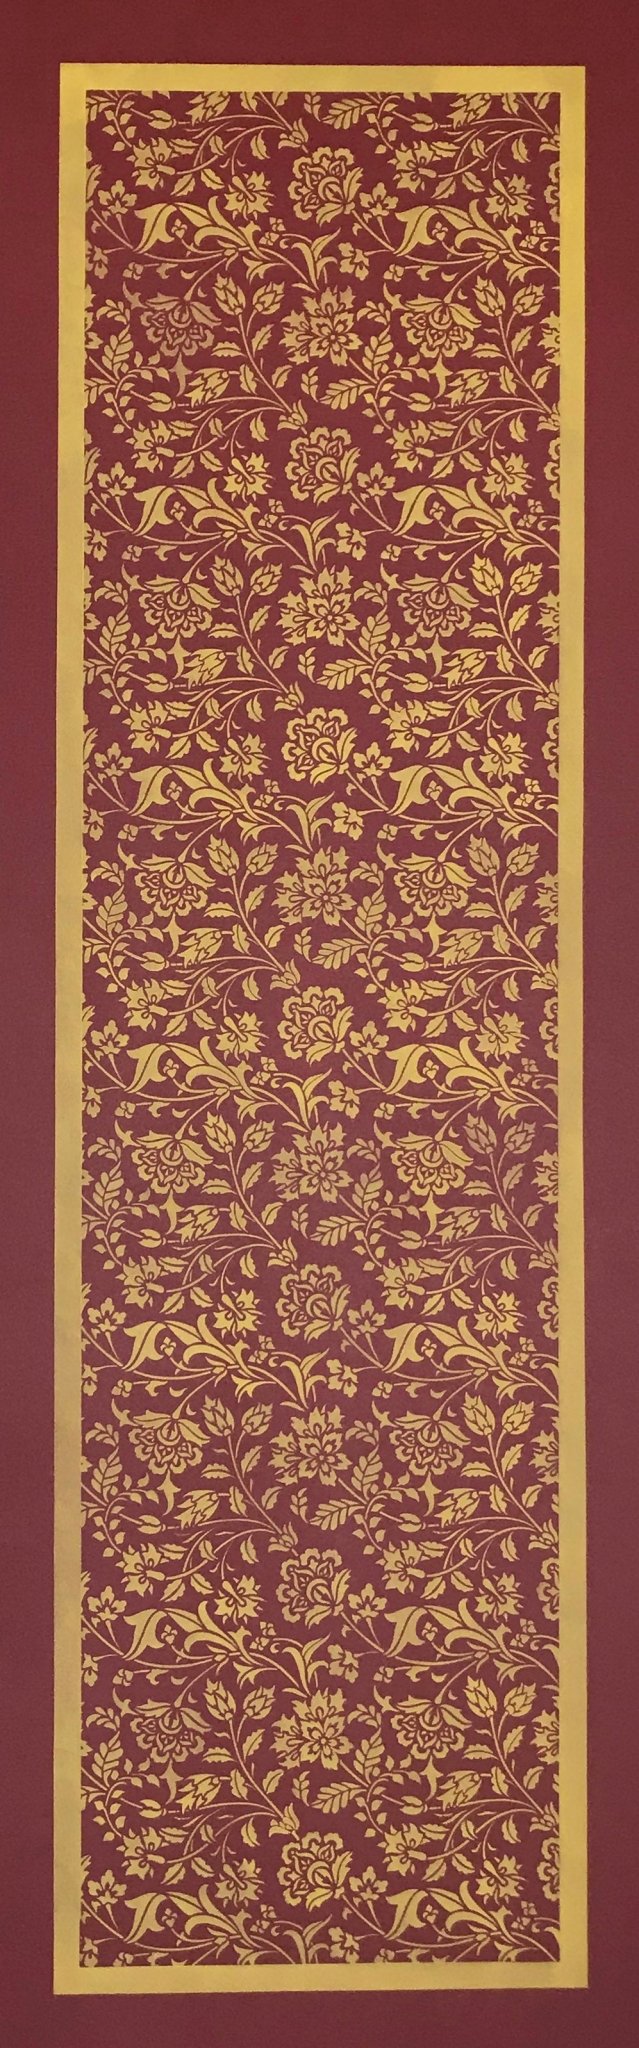 The full image of this floorcloth runner based on a chintz pattern.